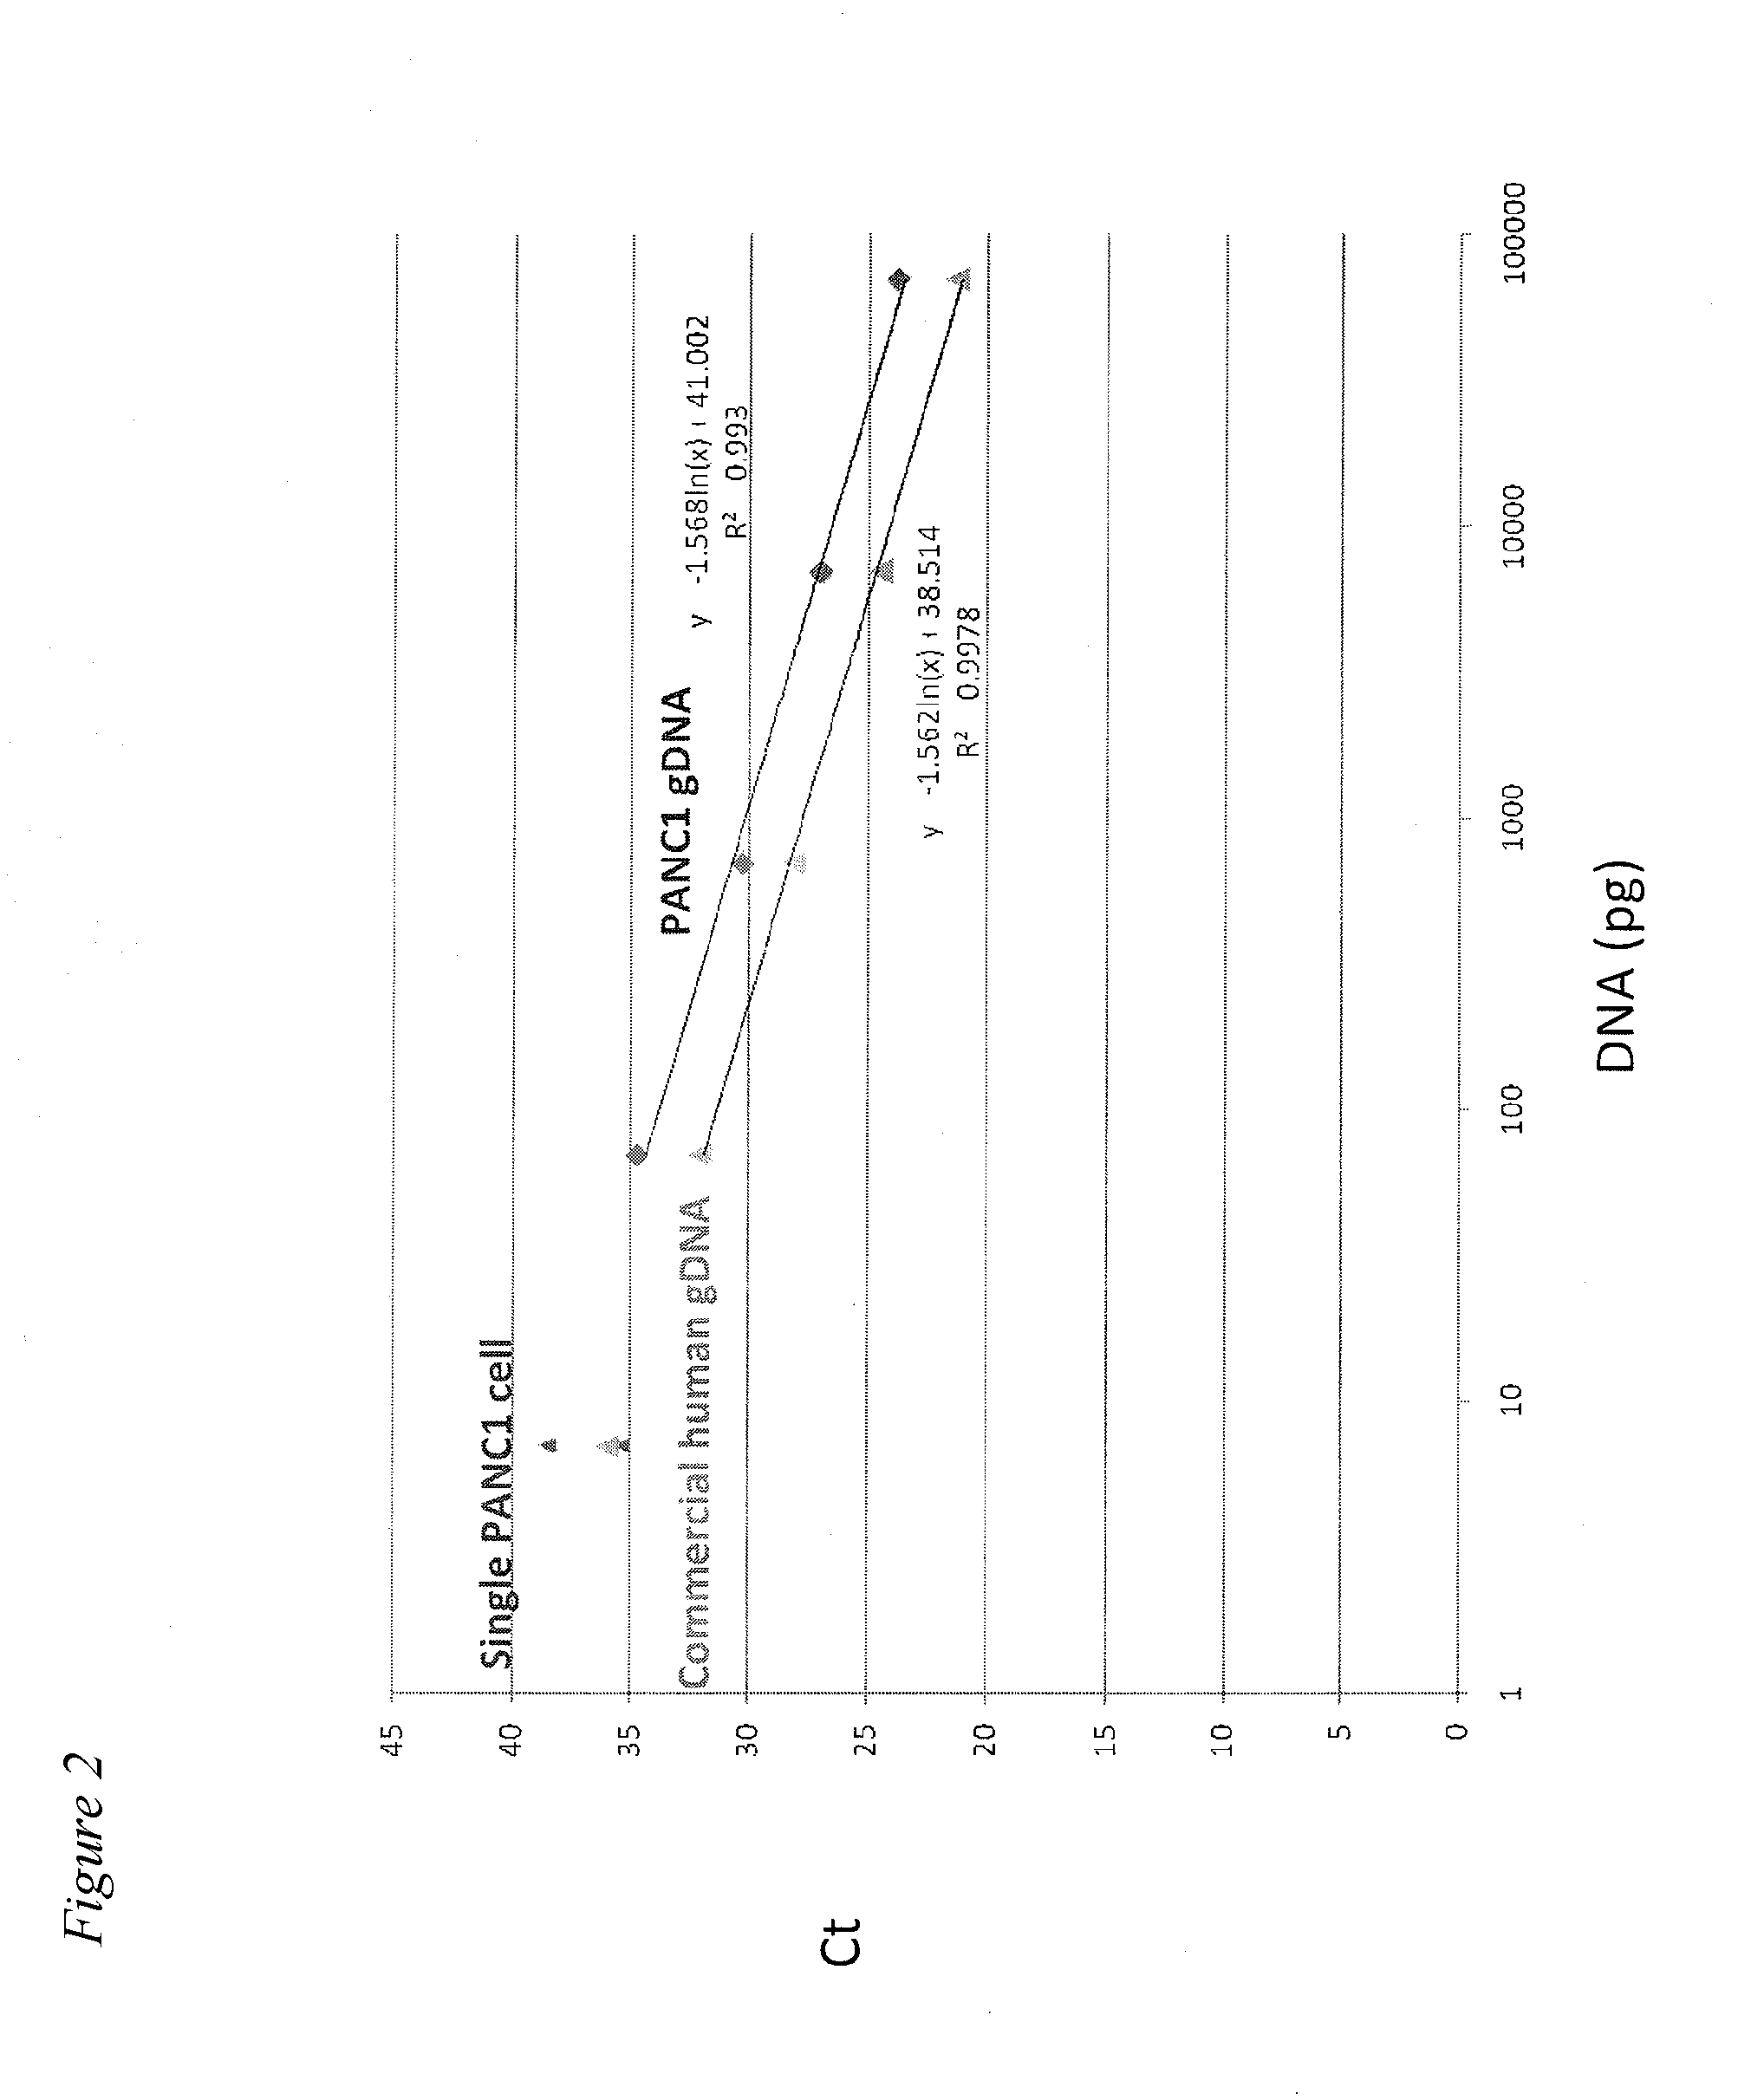 Methods for obtaining single cells and applications of single cell omics